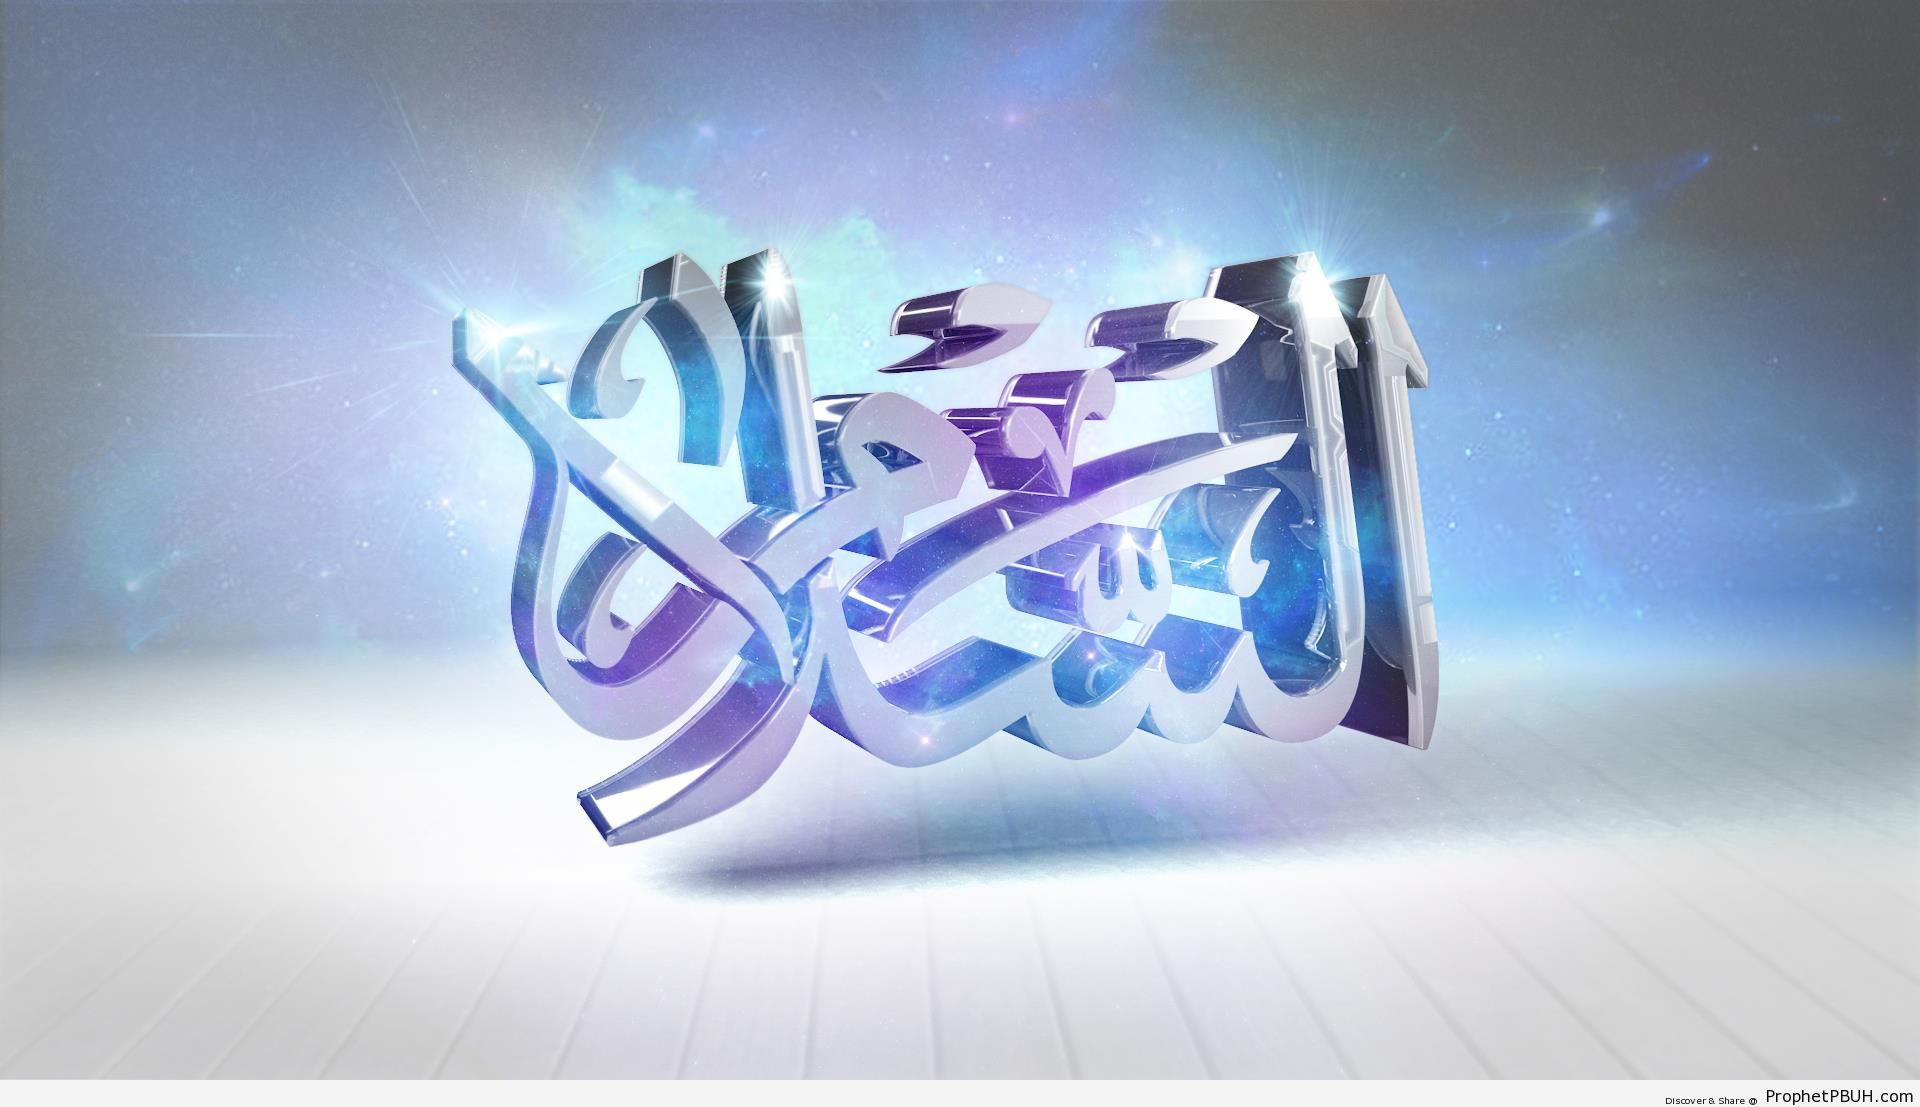 As-Salam [The Source of Peace and Salvation] Allah Attribute 3D Calligraphy HD Wallpaper [1920 x 1080] - 3D Calligraphy and Typography 